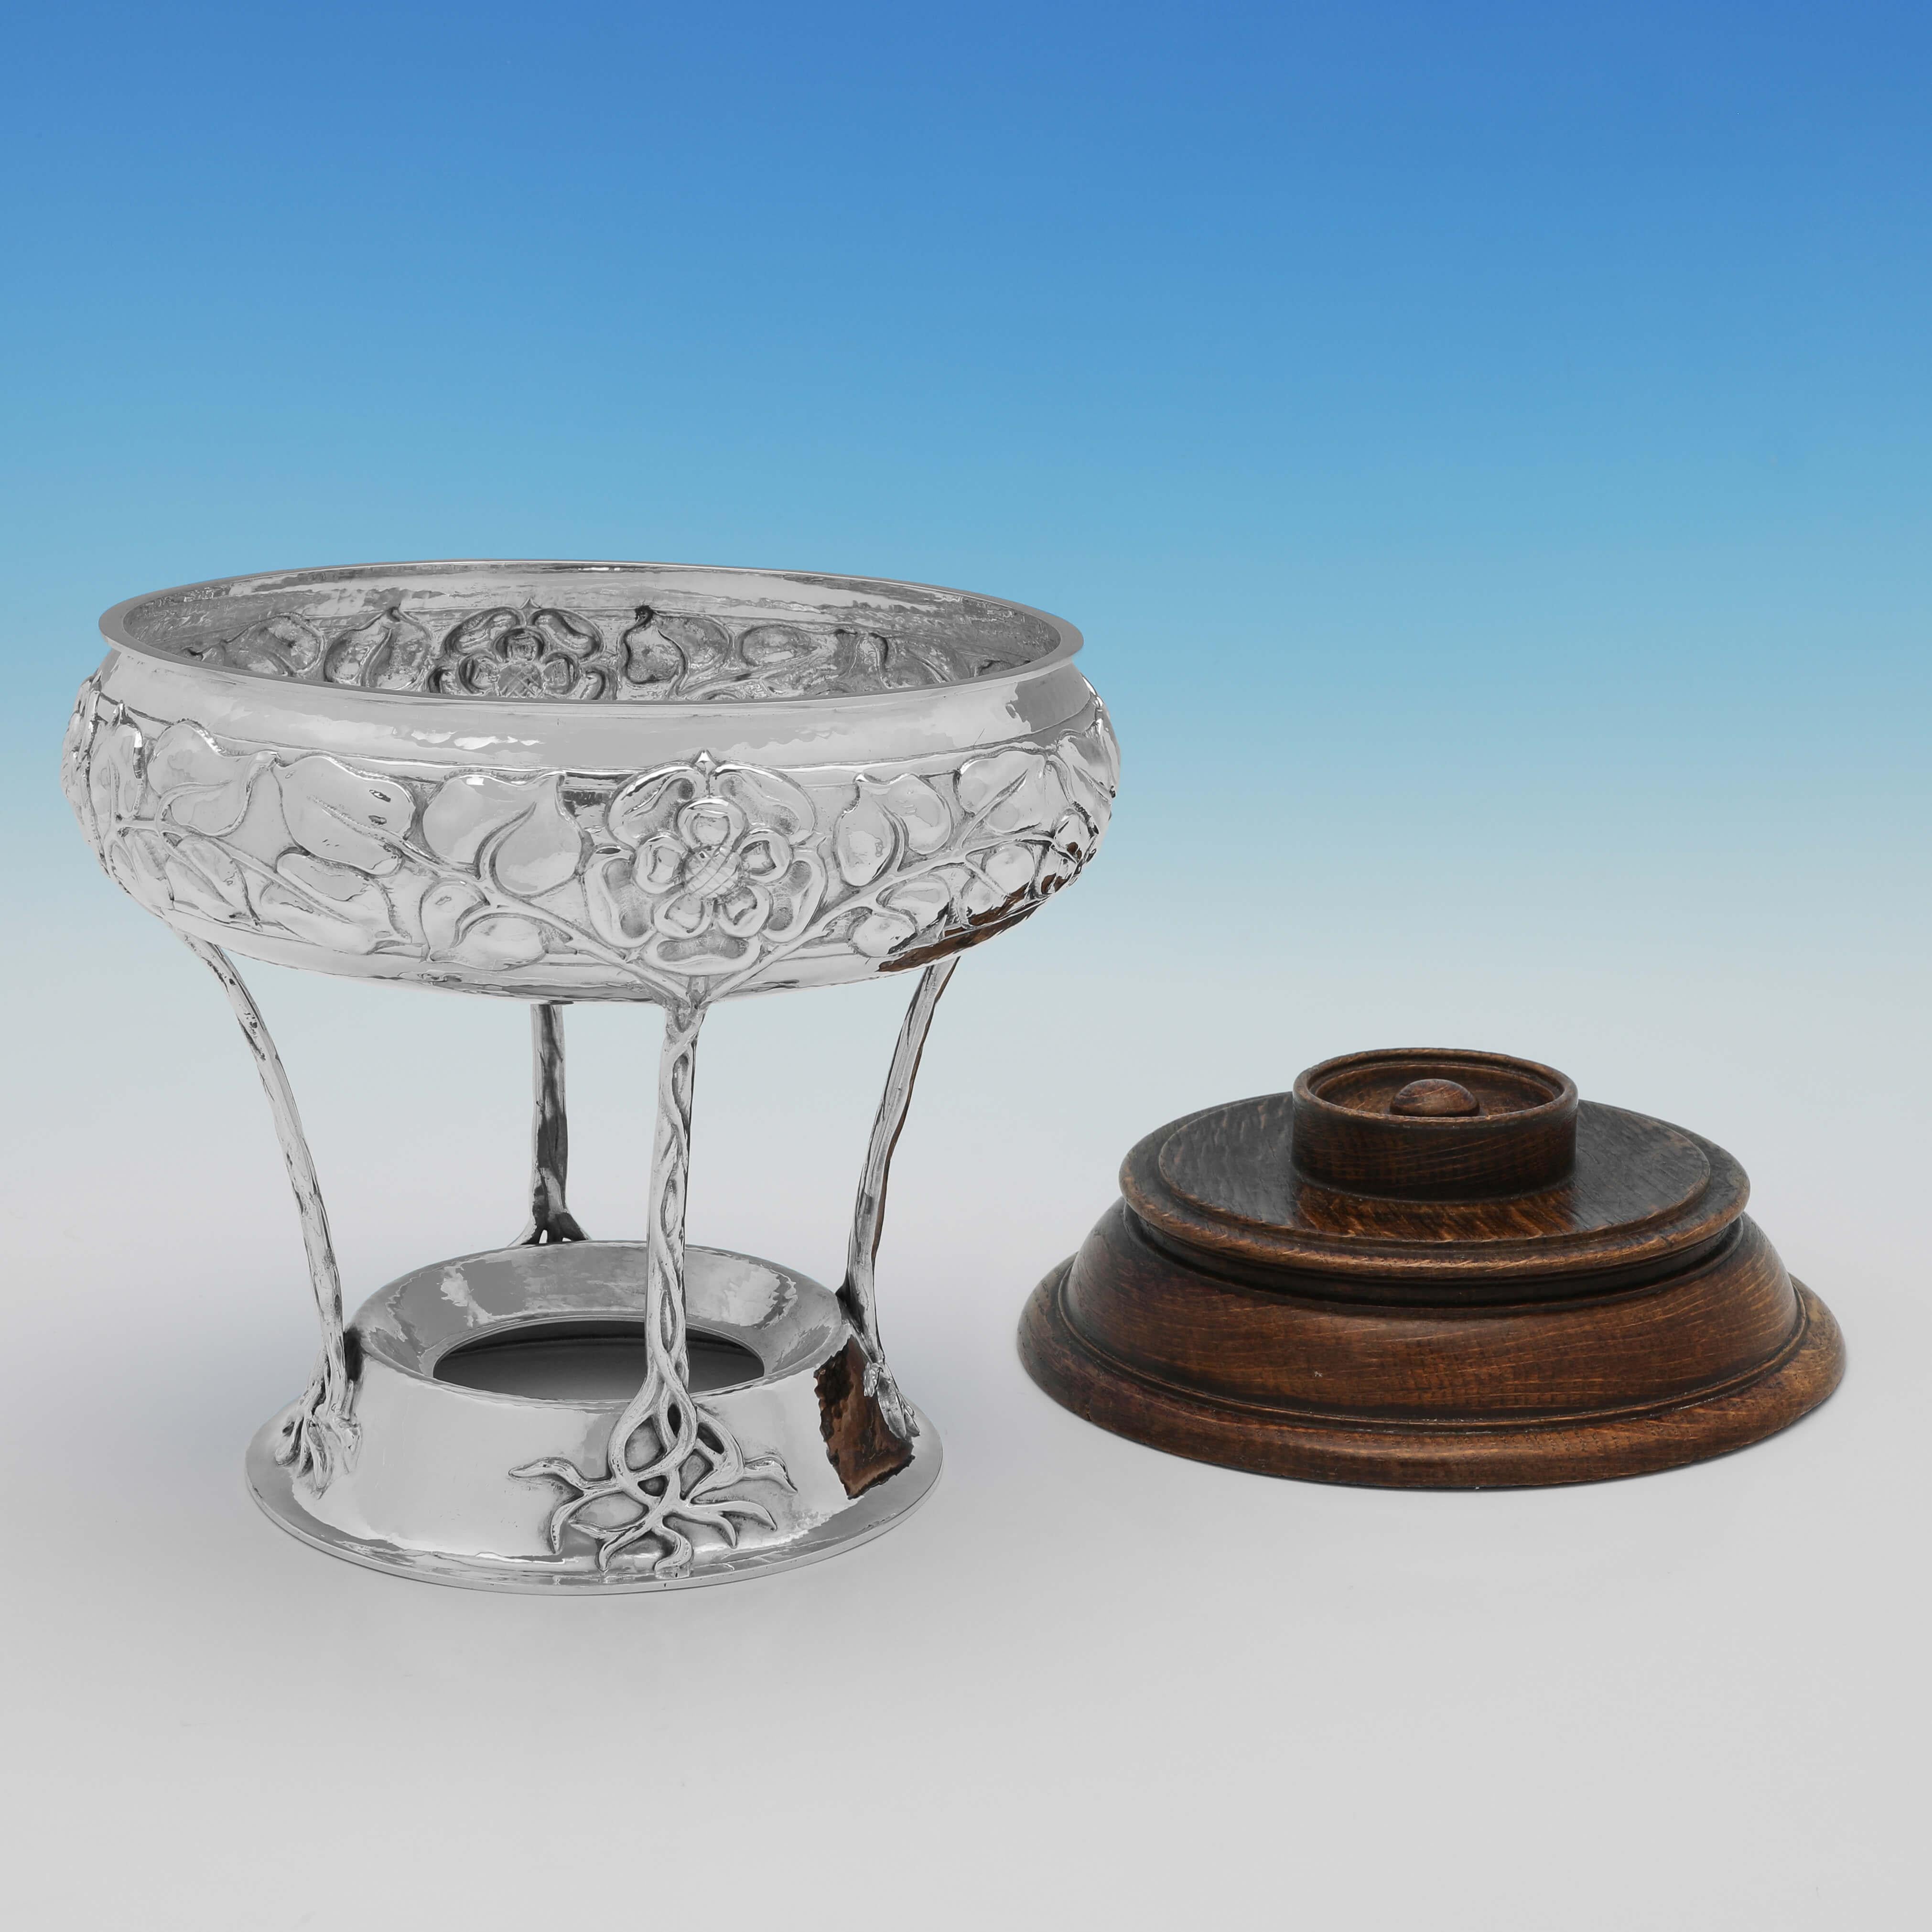 Hallmarked in Birmingham in 1924 by Connell, this wonderful Sterling Silver Bowl on Stand, is in the Arts & Crafts taste with naturalistic decoration throughout, and standing on a wooden base. The bowl on stand measures 9.75